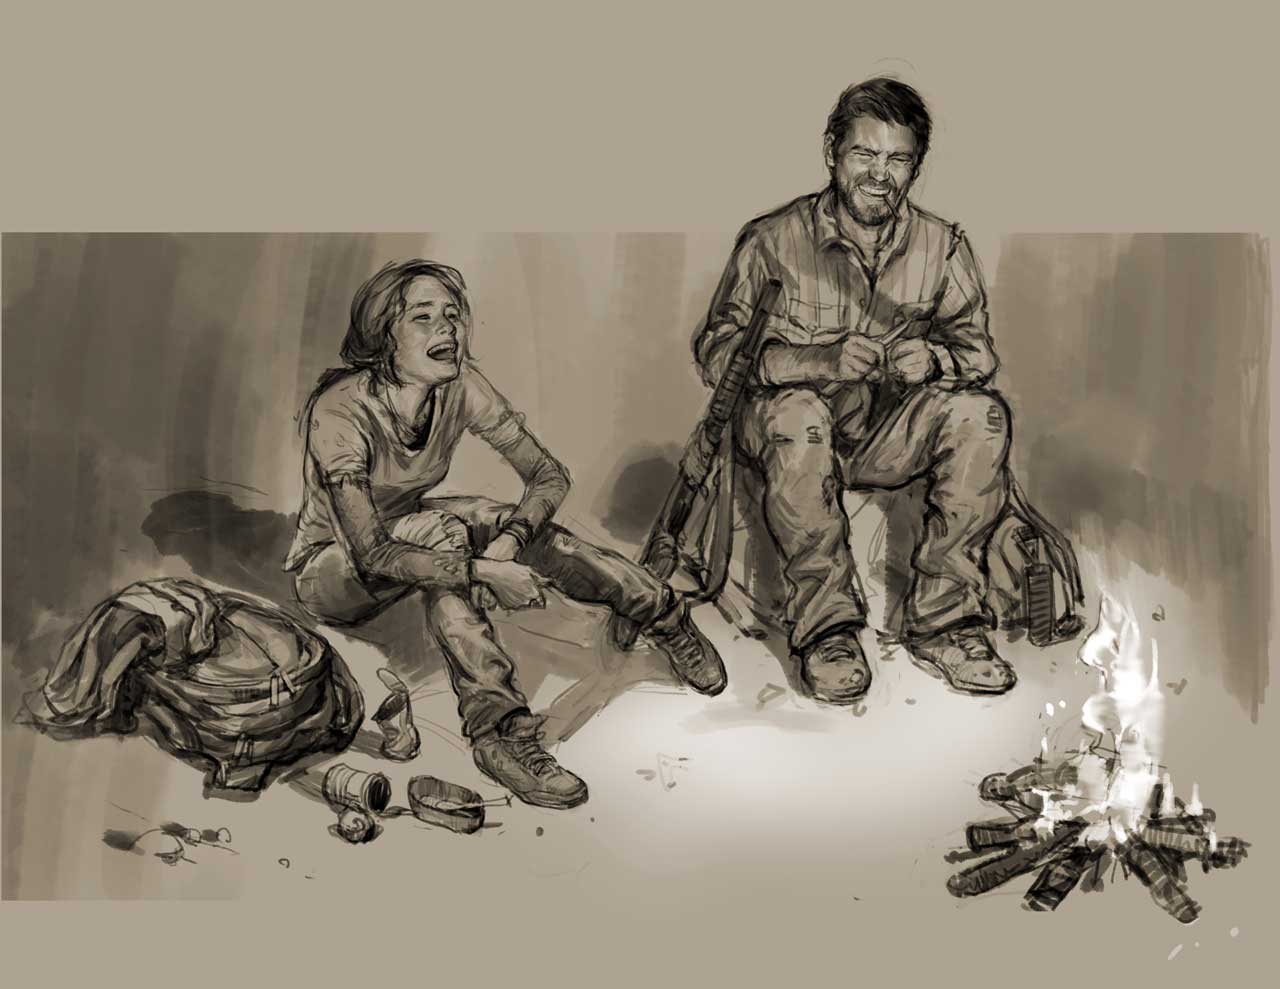 Photo: Ellie and Joel character sketch from The Last of Us, Naughty Dog, 2013